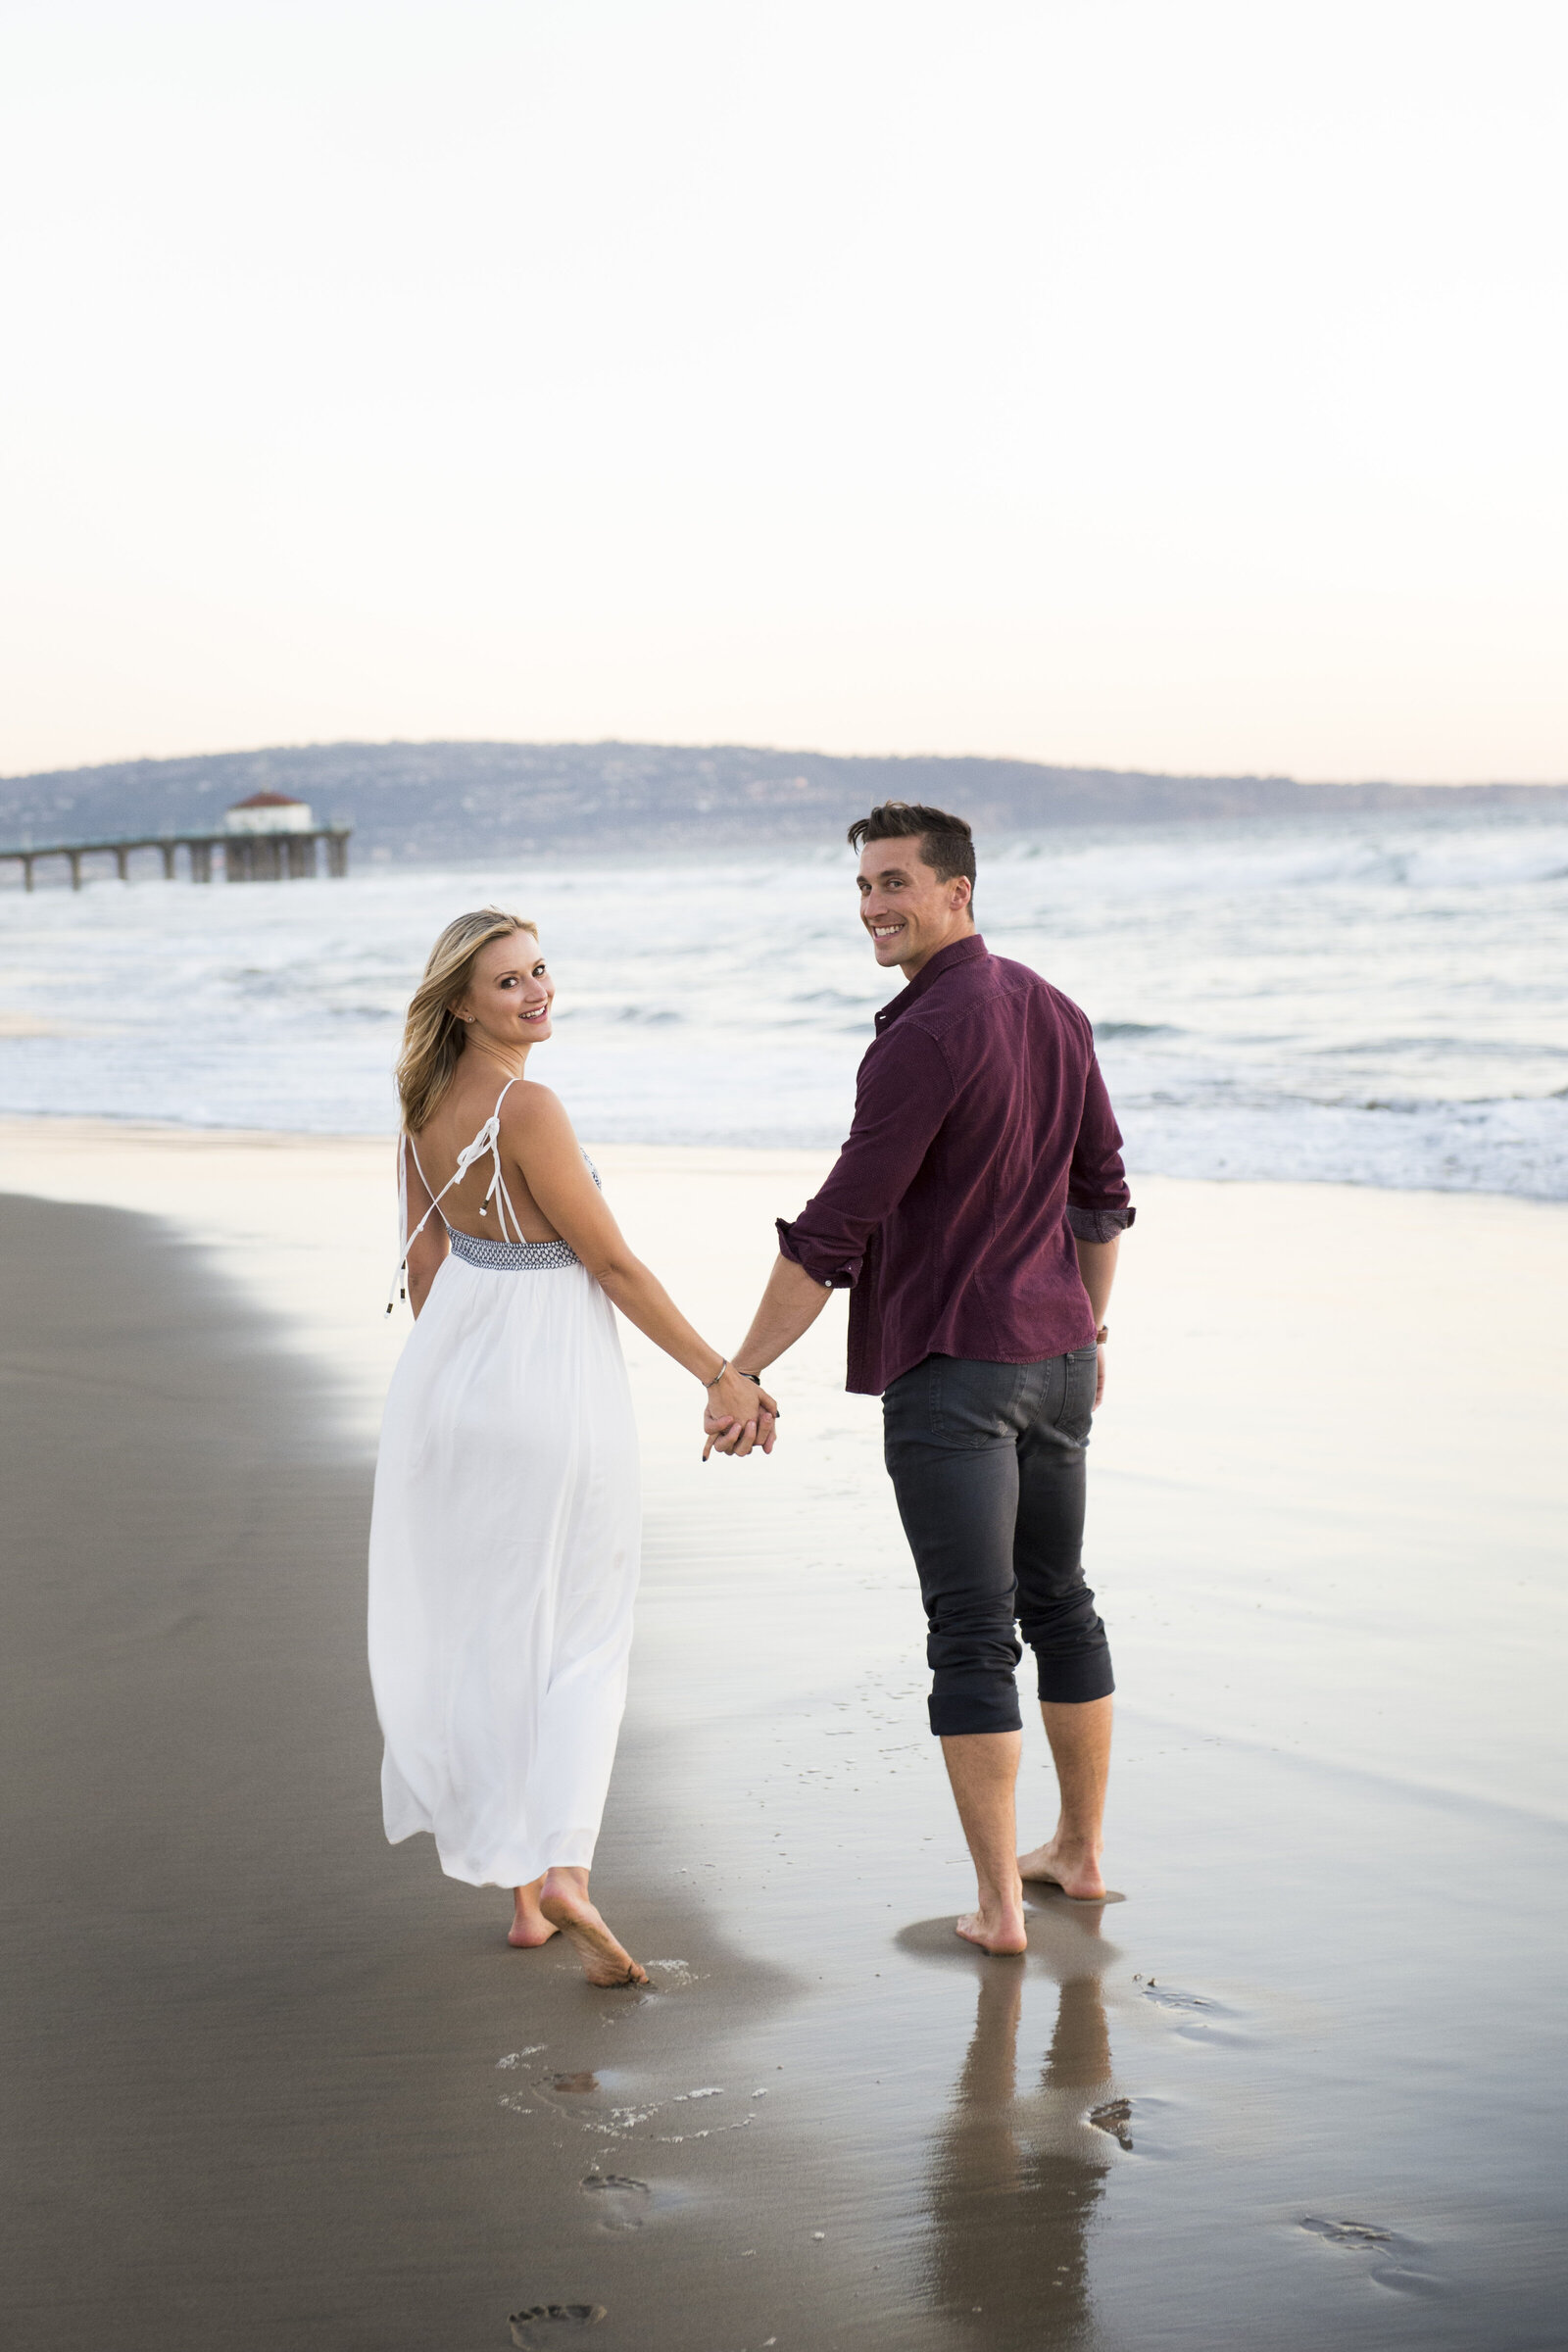 A couple walking down the beach looking back at the photographer during their engagement session.